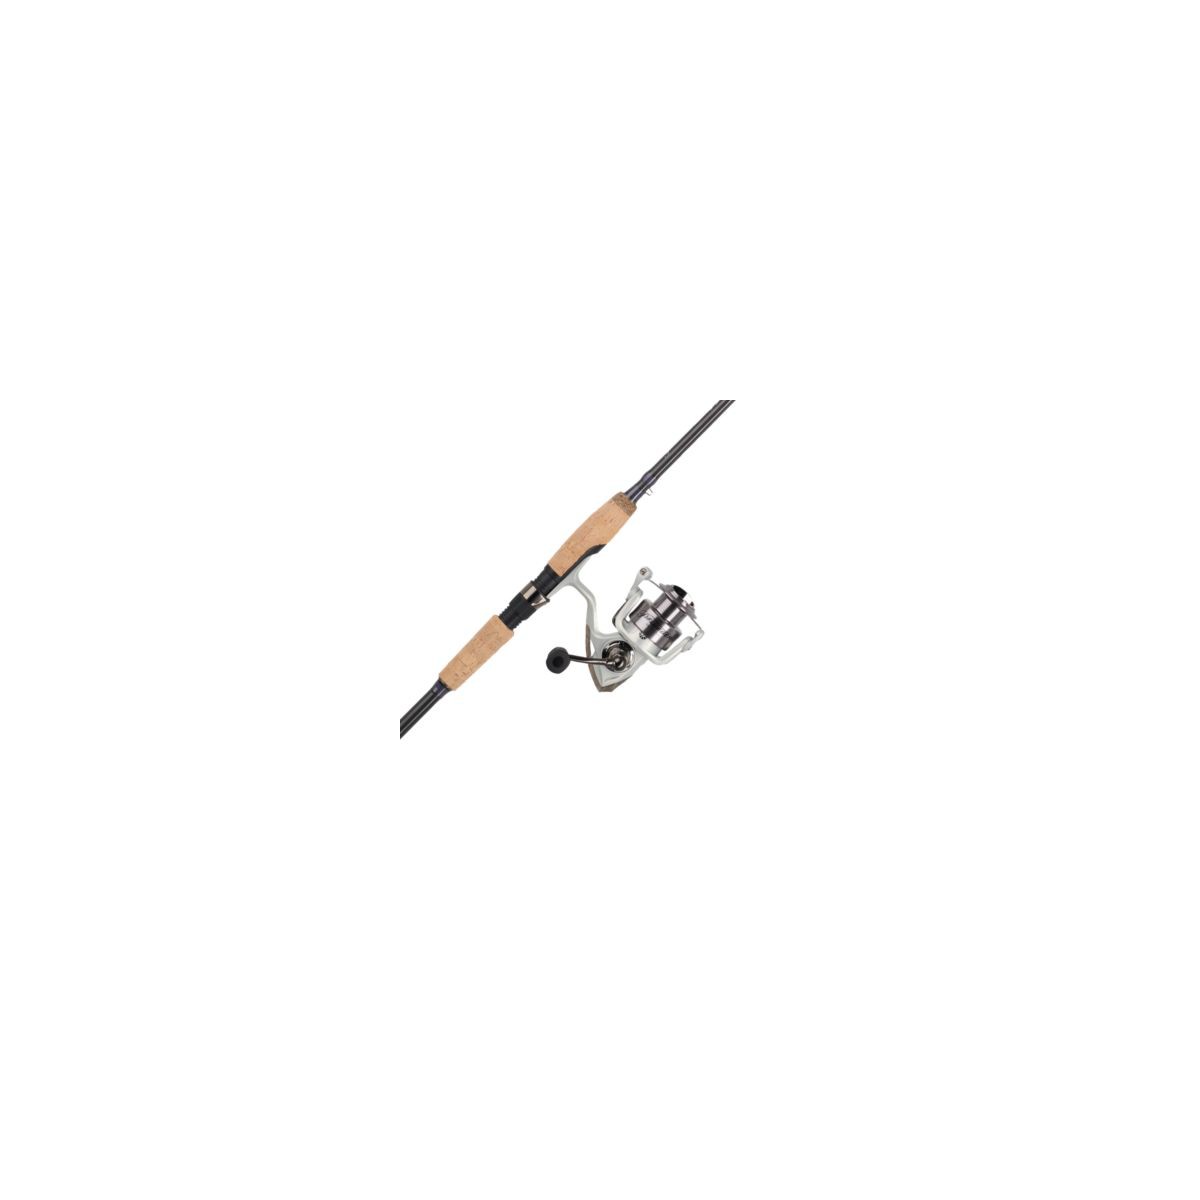 Pflueger 6' Monarch Spinning Rod and Reel Combo, Size 30 Reel